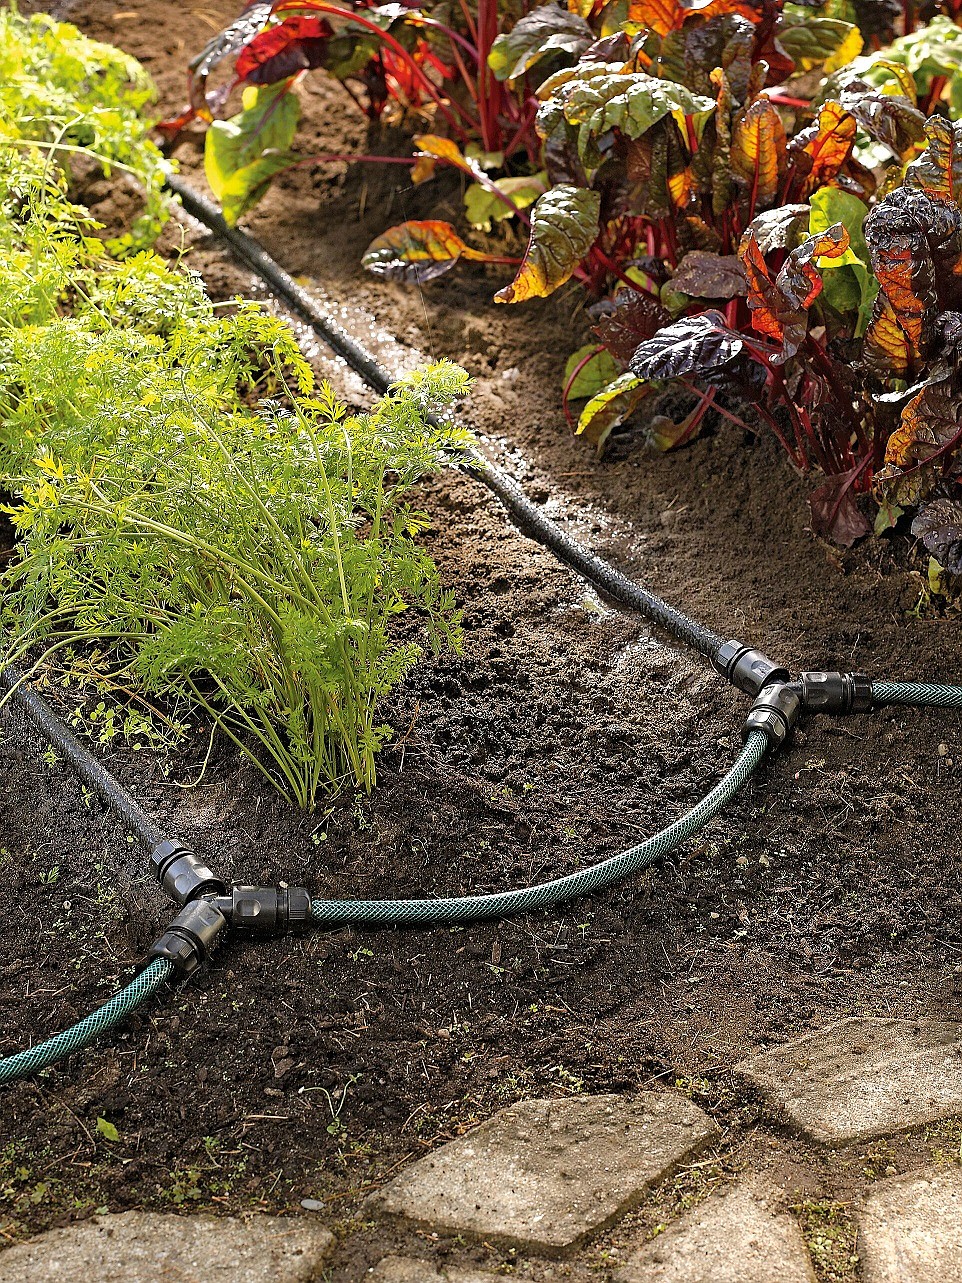 Snip-n-drip irrigation systems apply water directly where it is needed and fit any garden planted in rows. Photo courtesy of Gardener’s Supply Company/gardeners.com